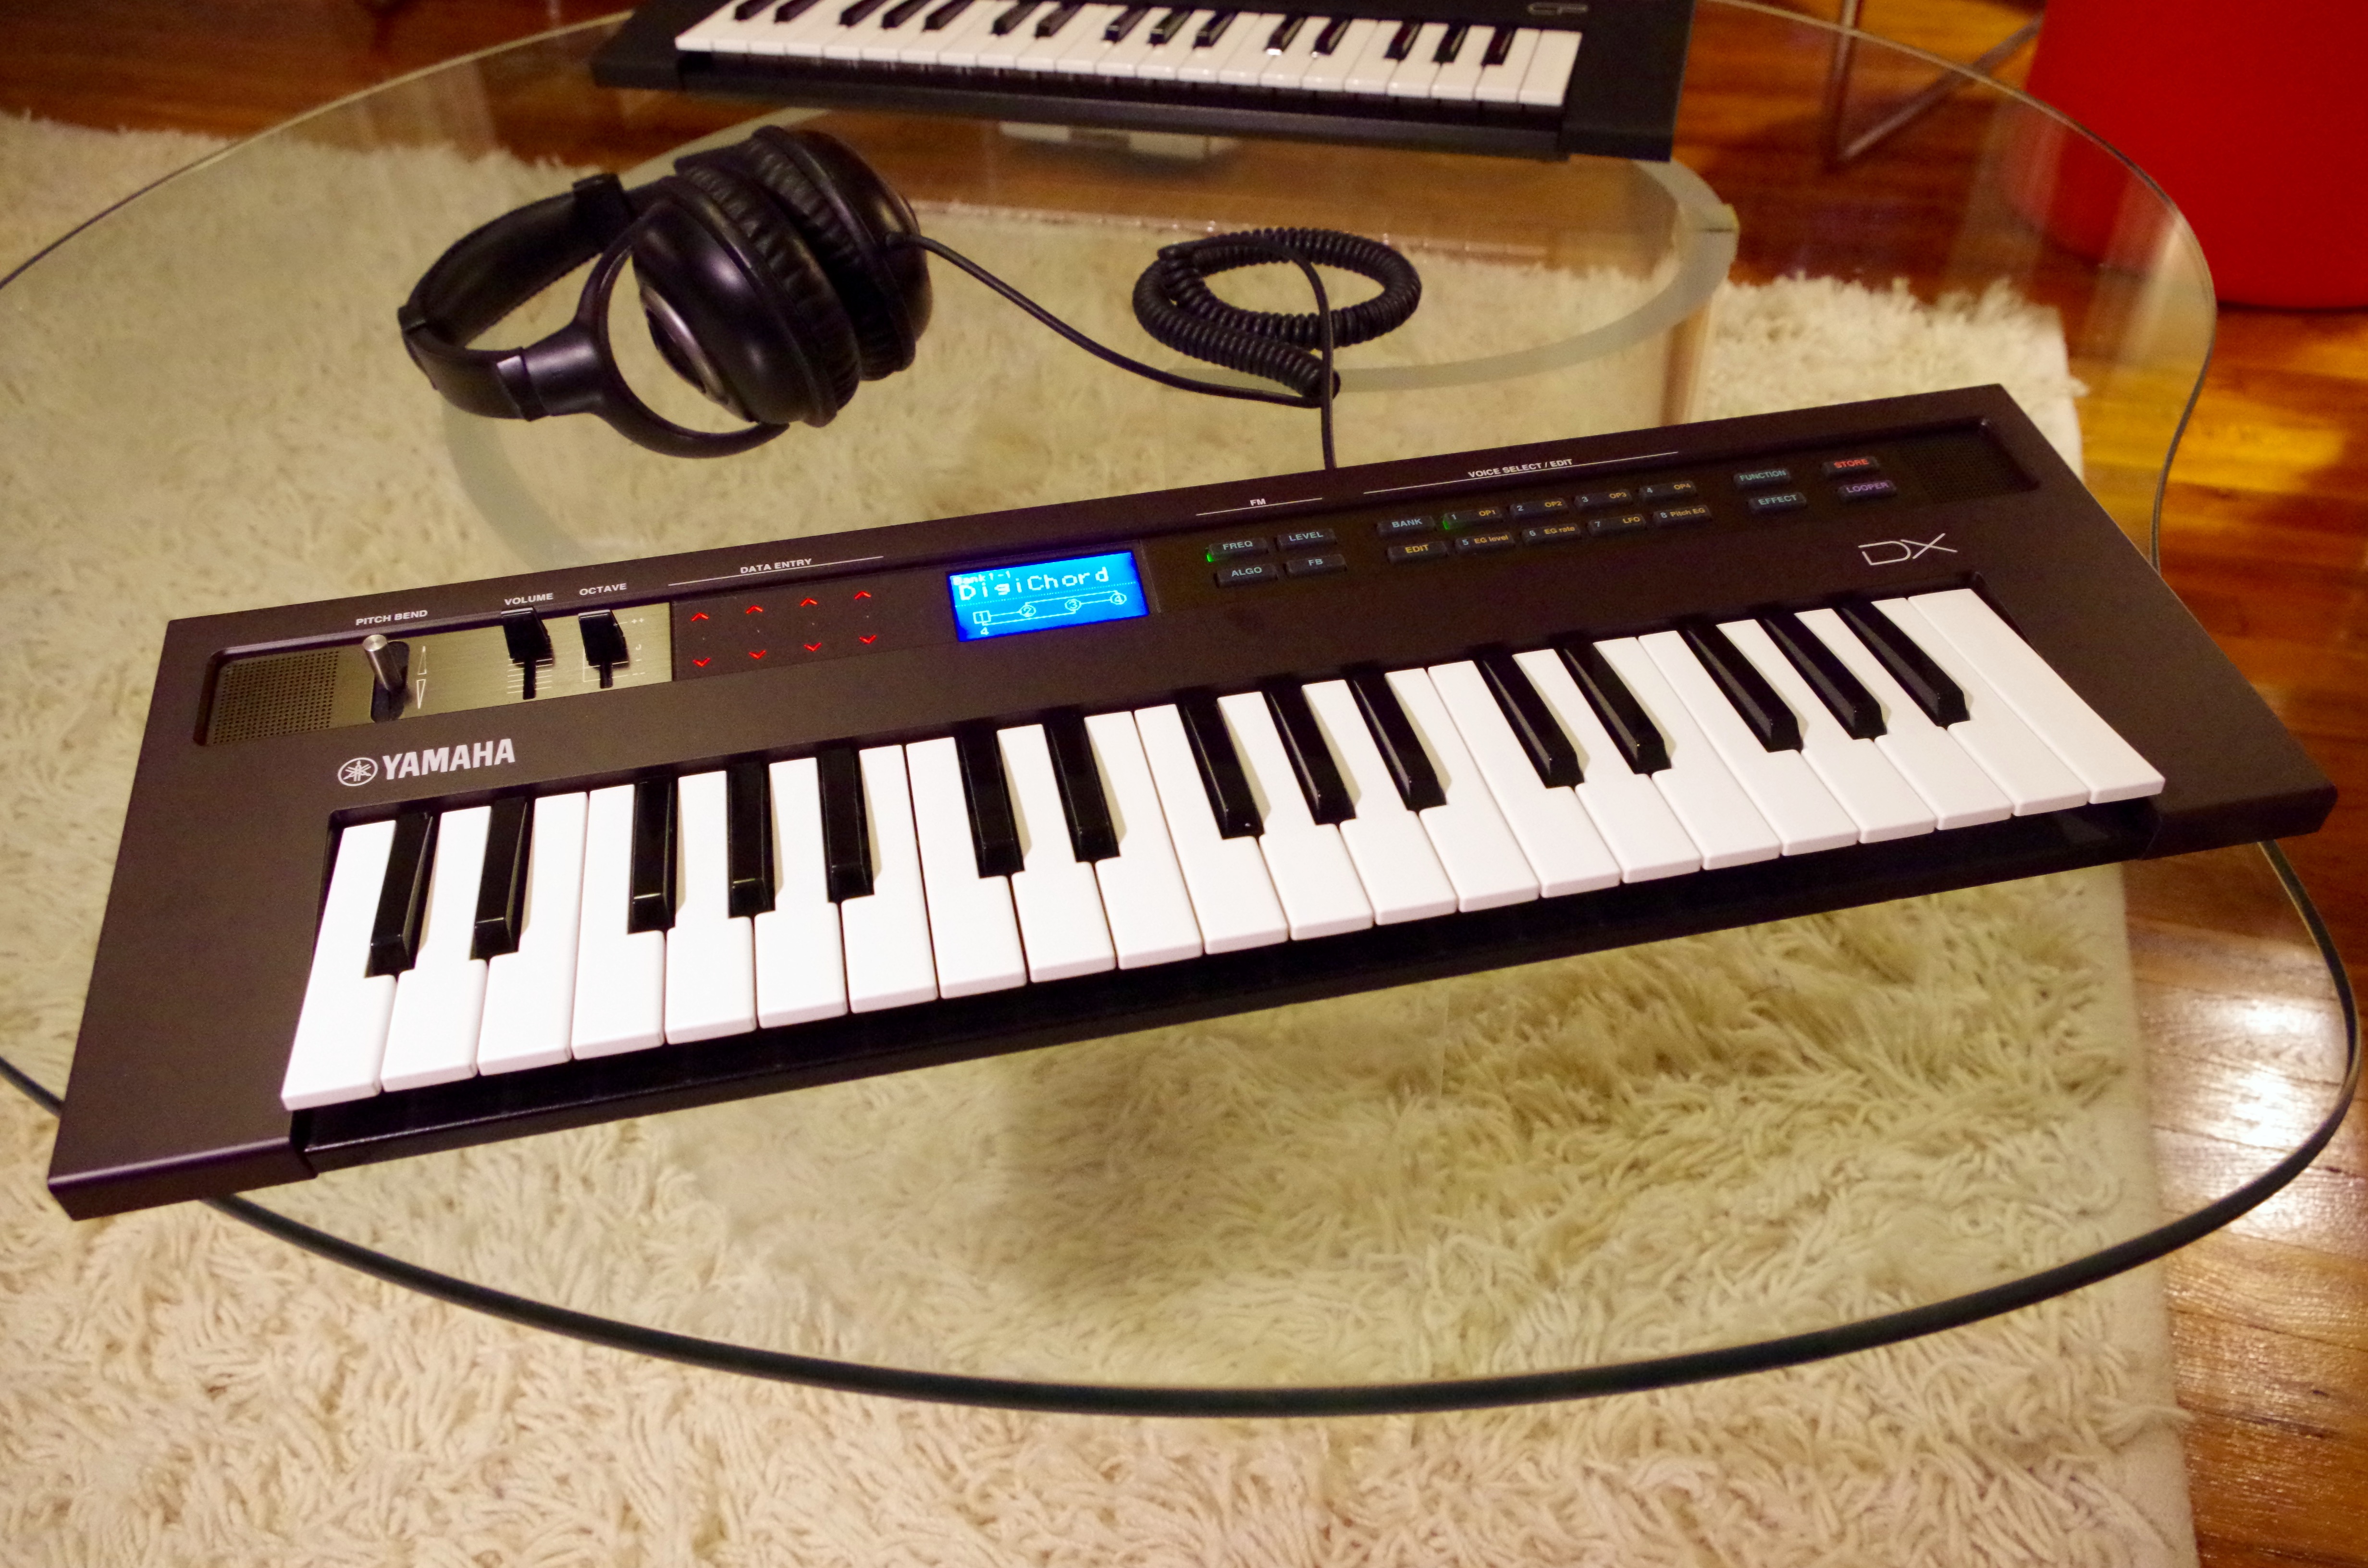 Yamaha Reface DX Synthesizer Review – User-Friendly FM Programming